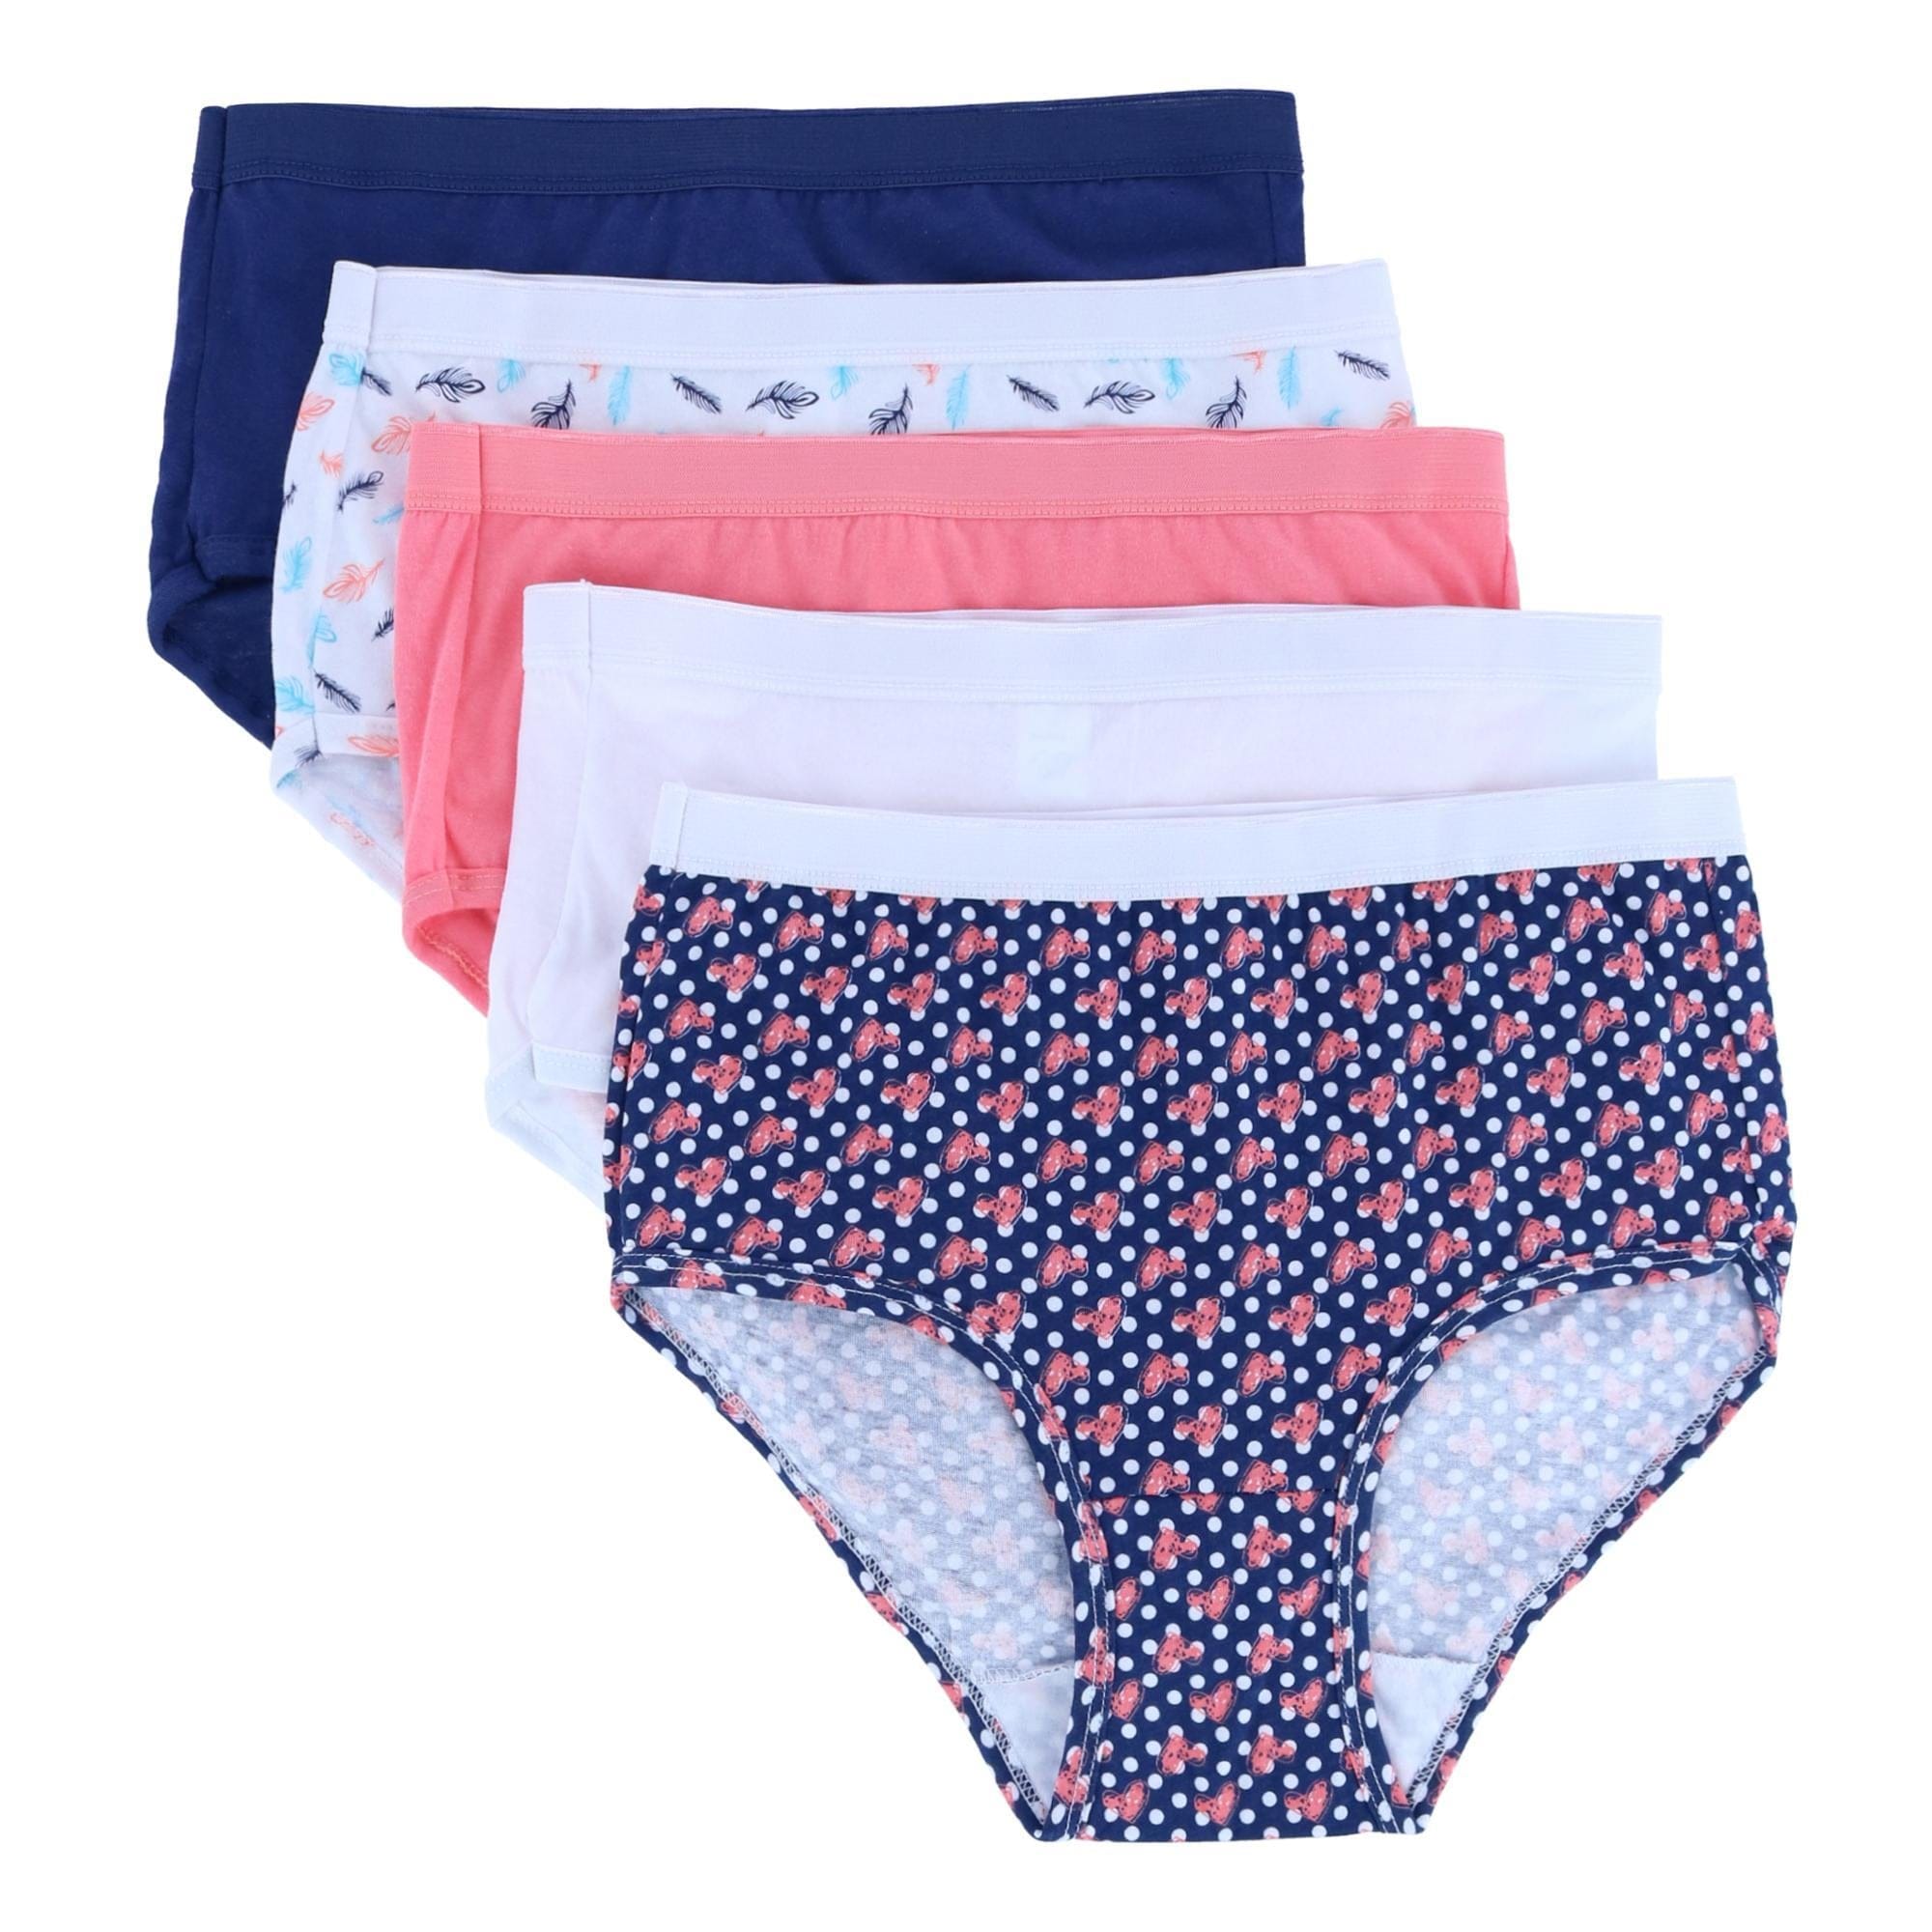 Women's Cotton Brief Underwear (Pack of 5) by Chili Peppers